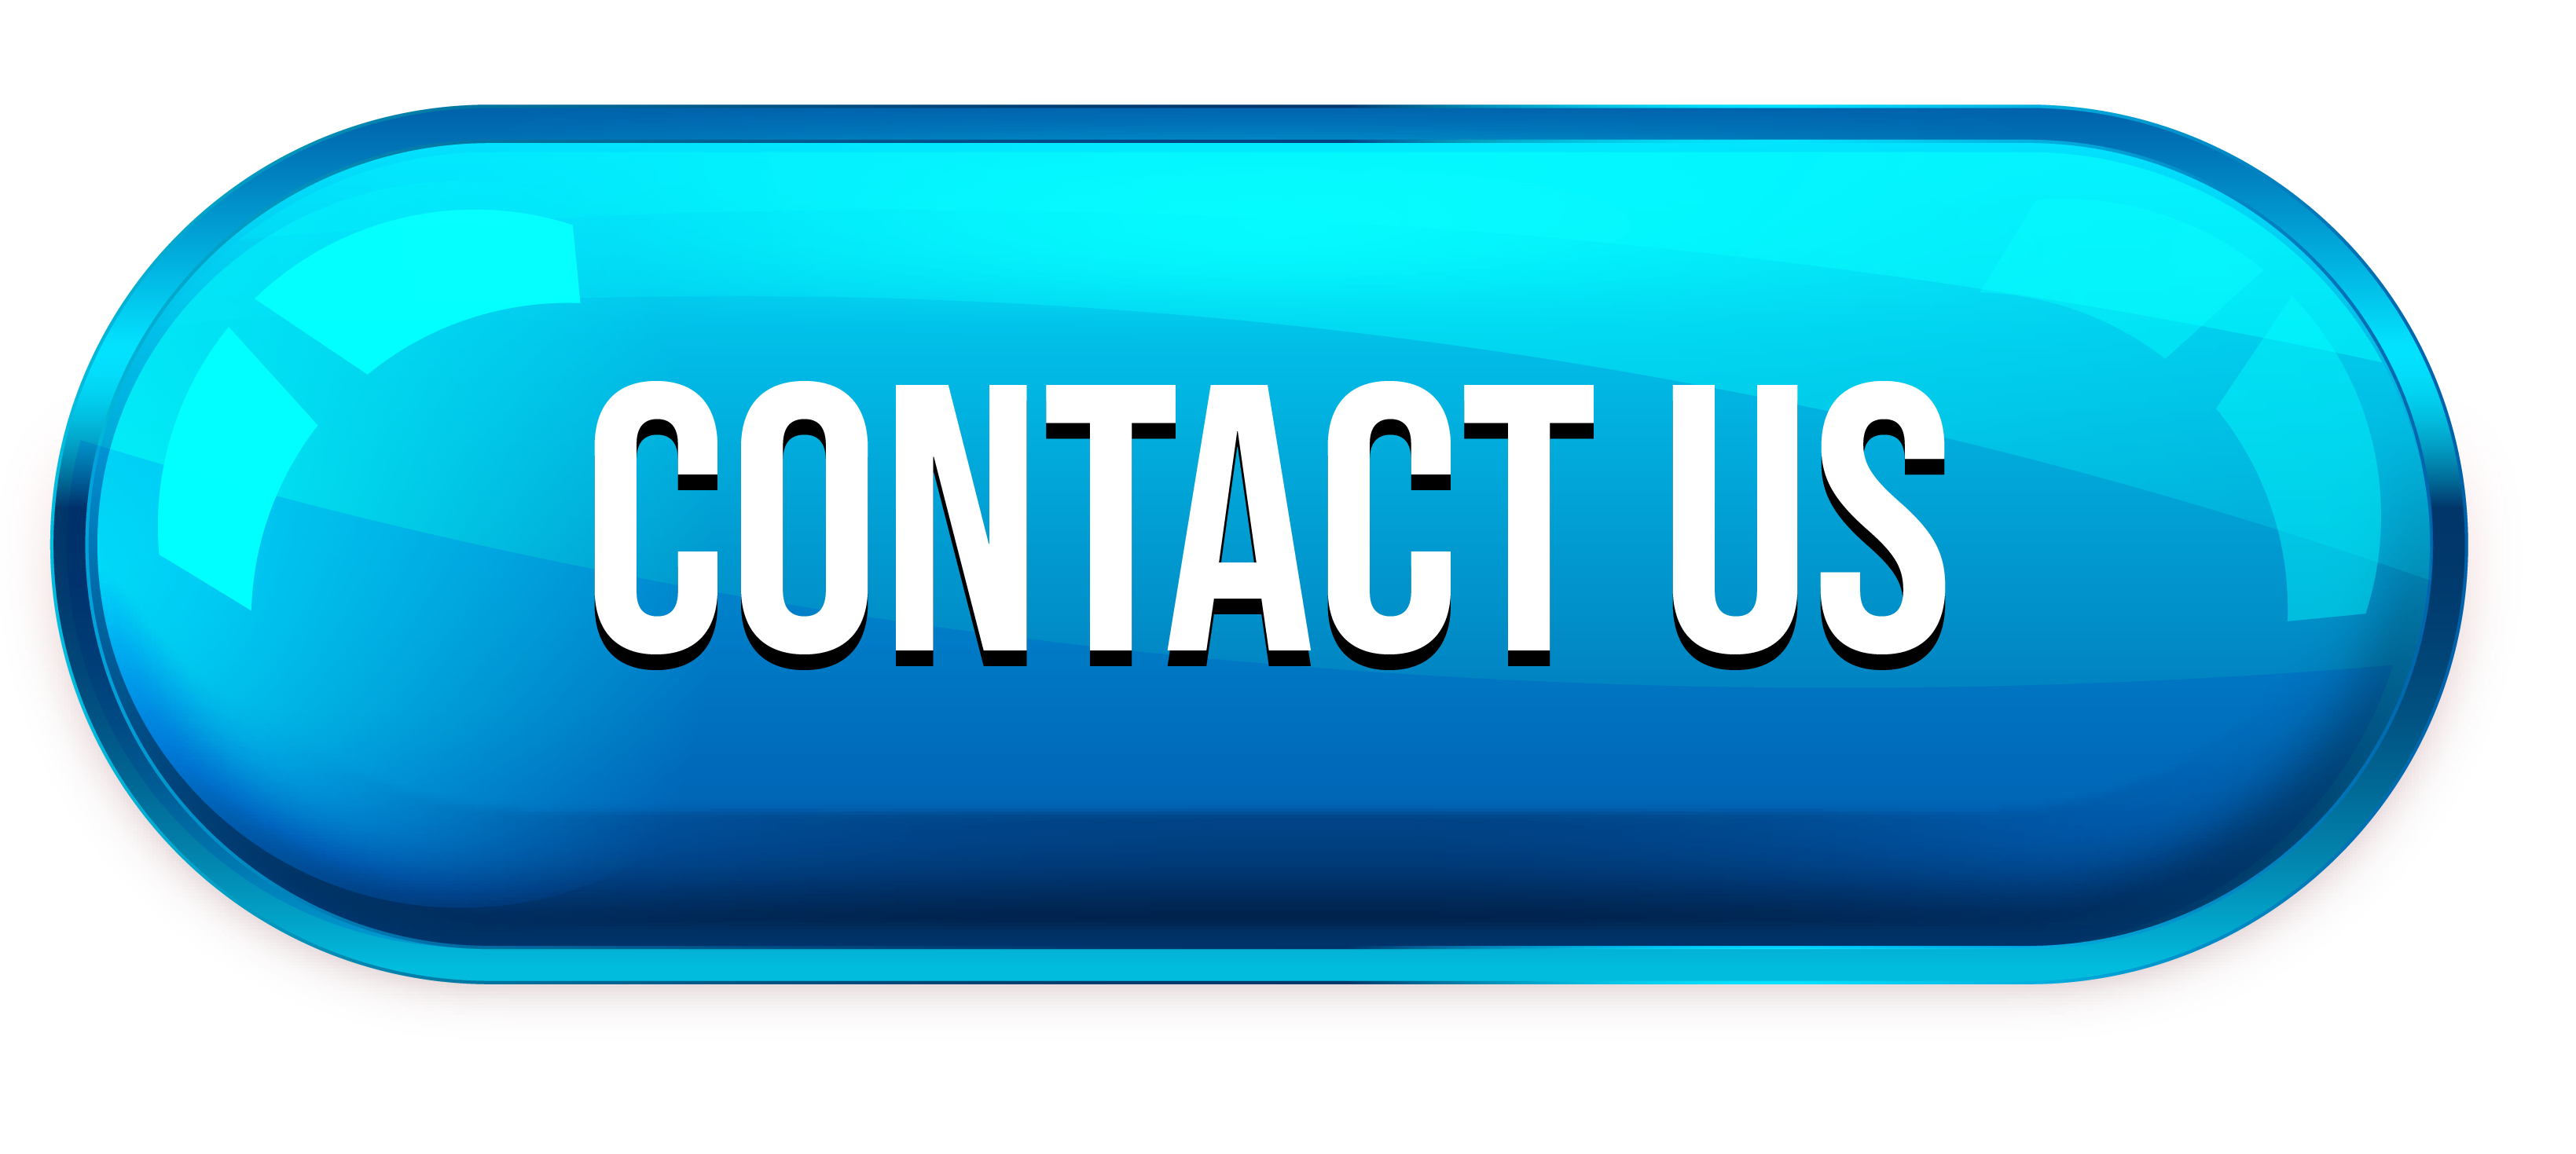 Contact Us Button PNG Images Transparent Background | PNG Play